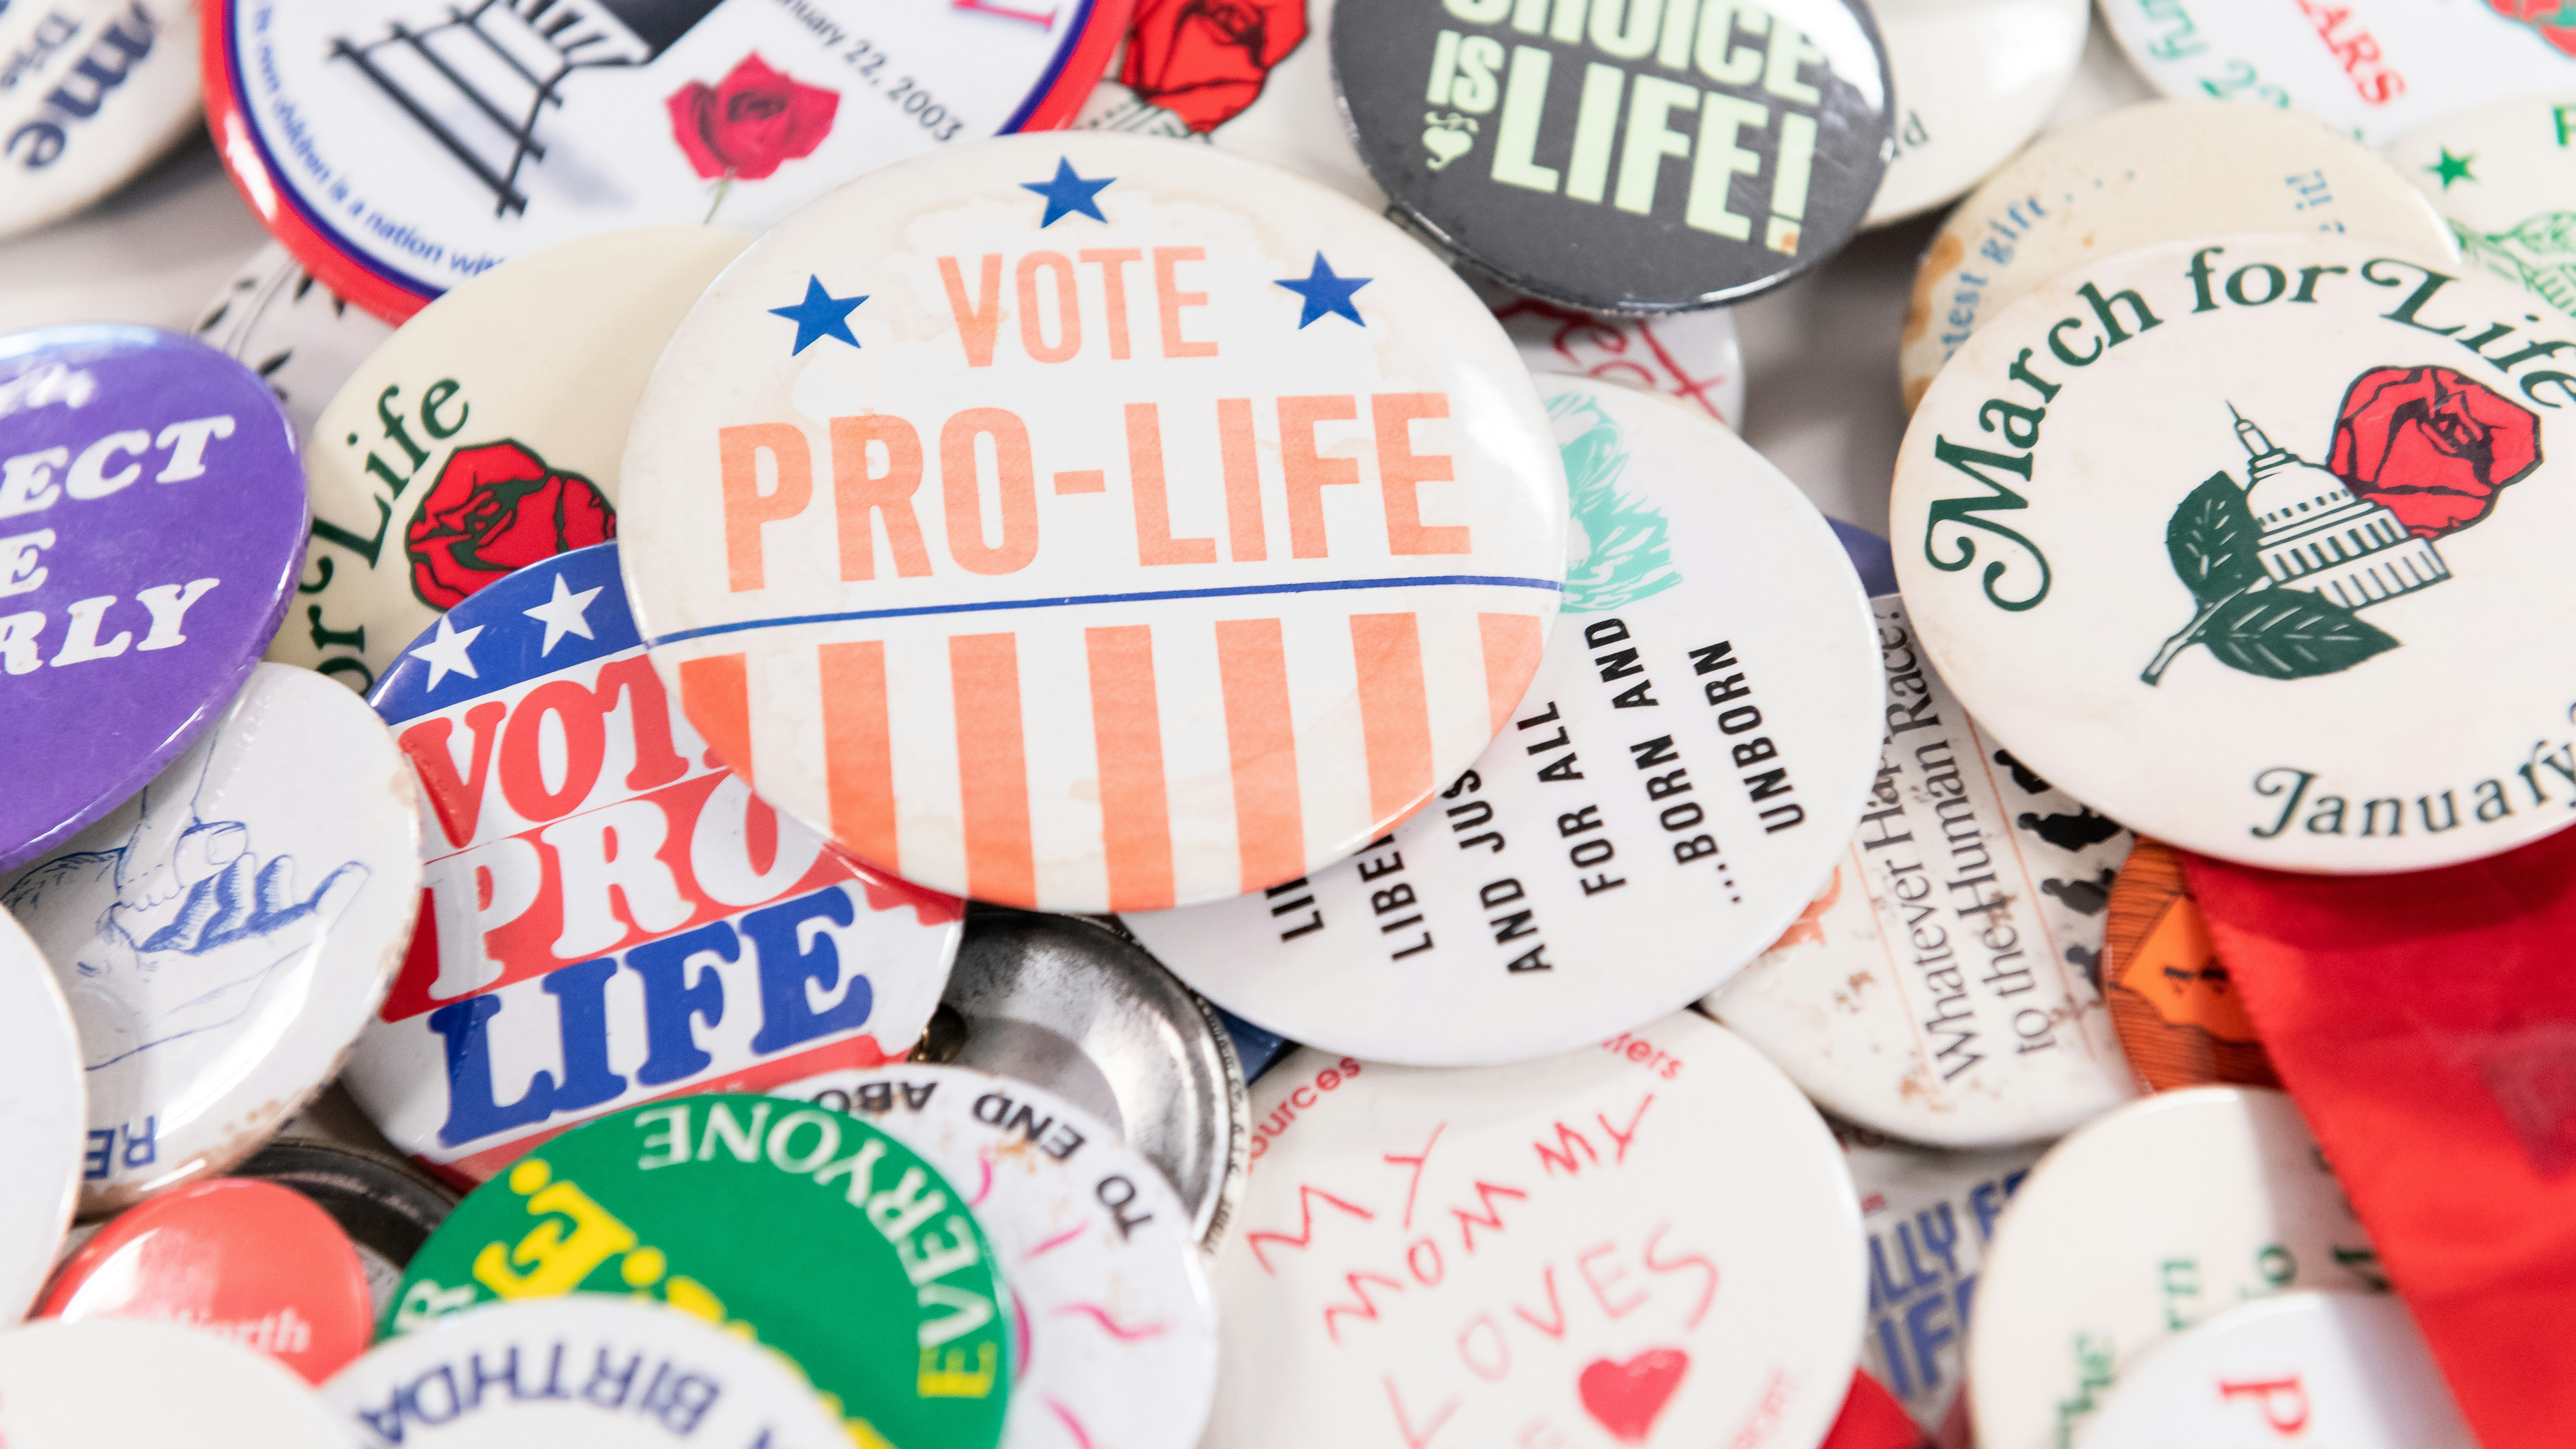 A pile of colorful buttons advertising pro-life slogans